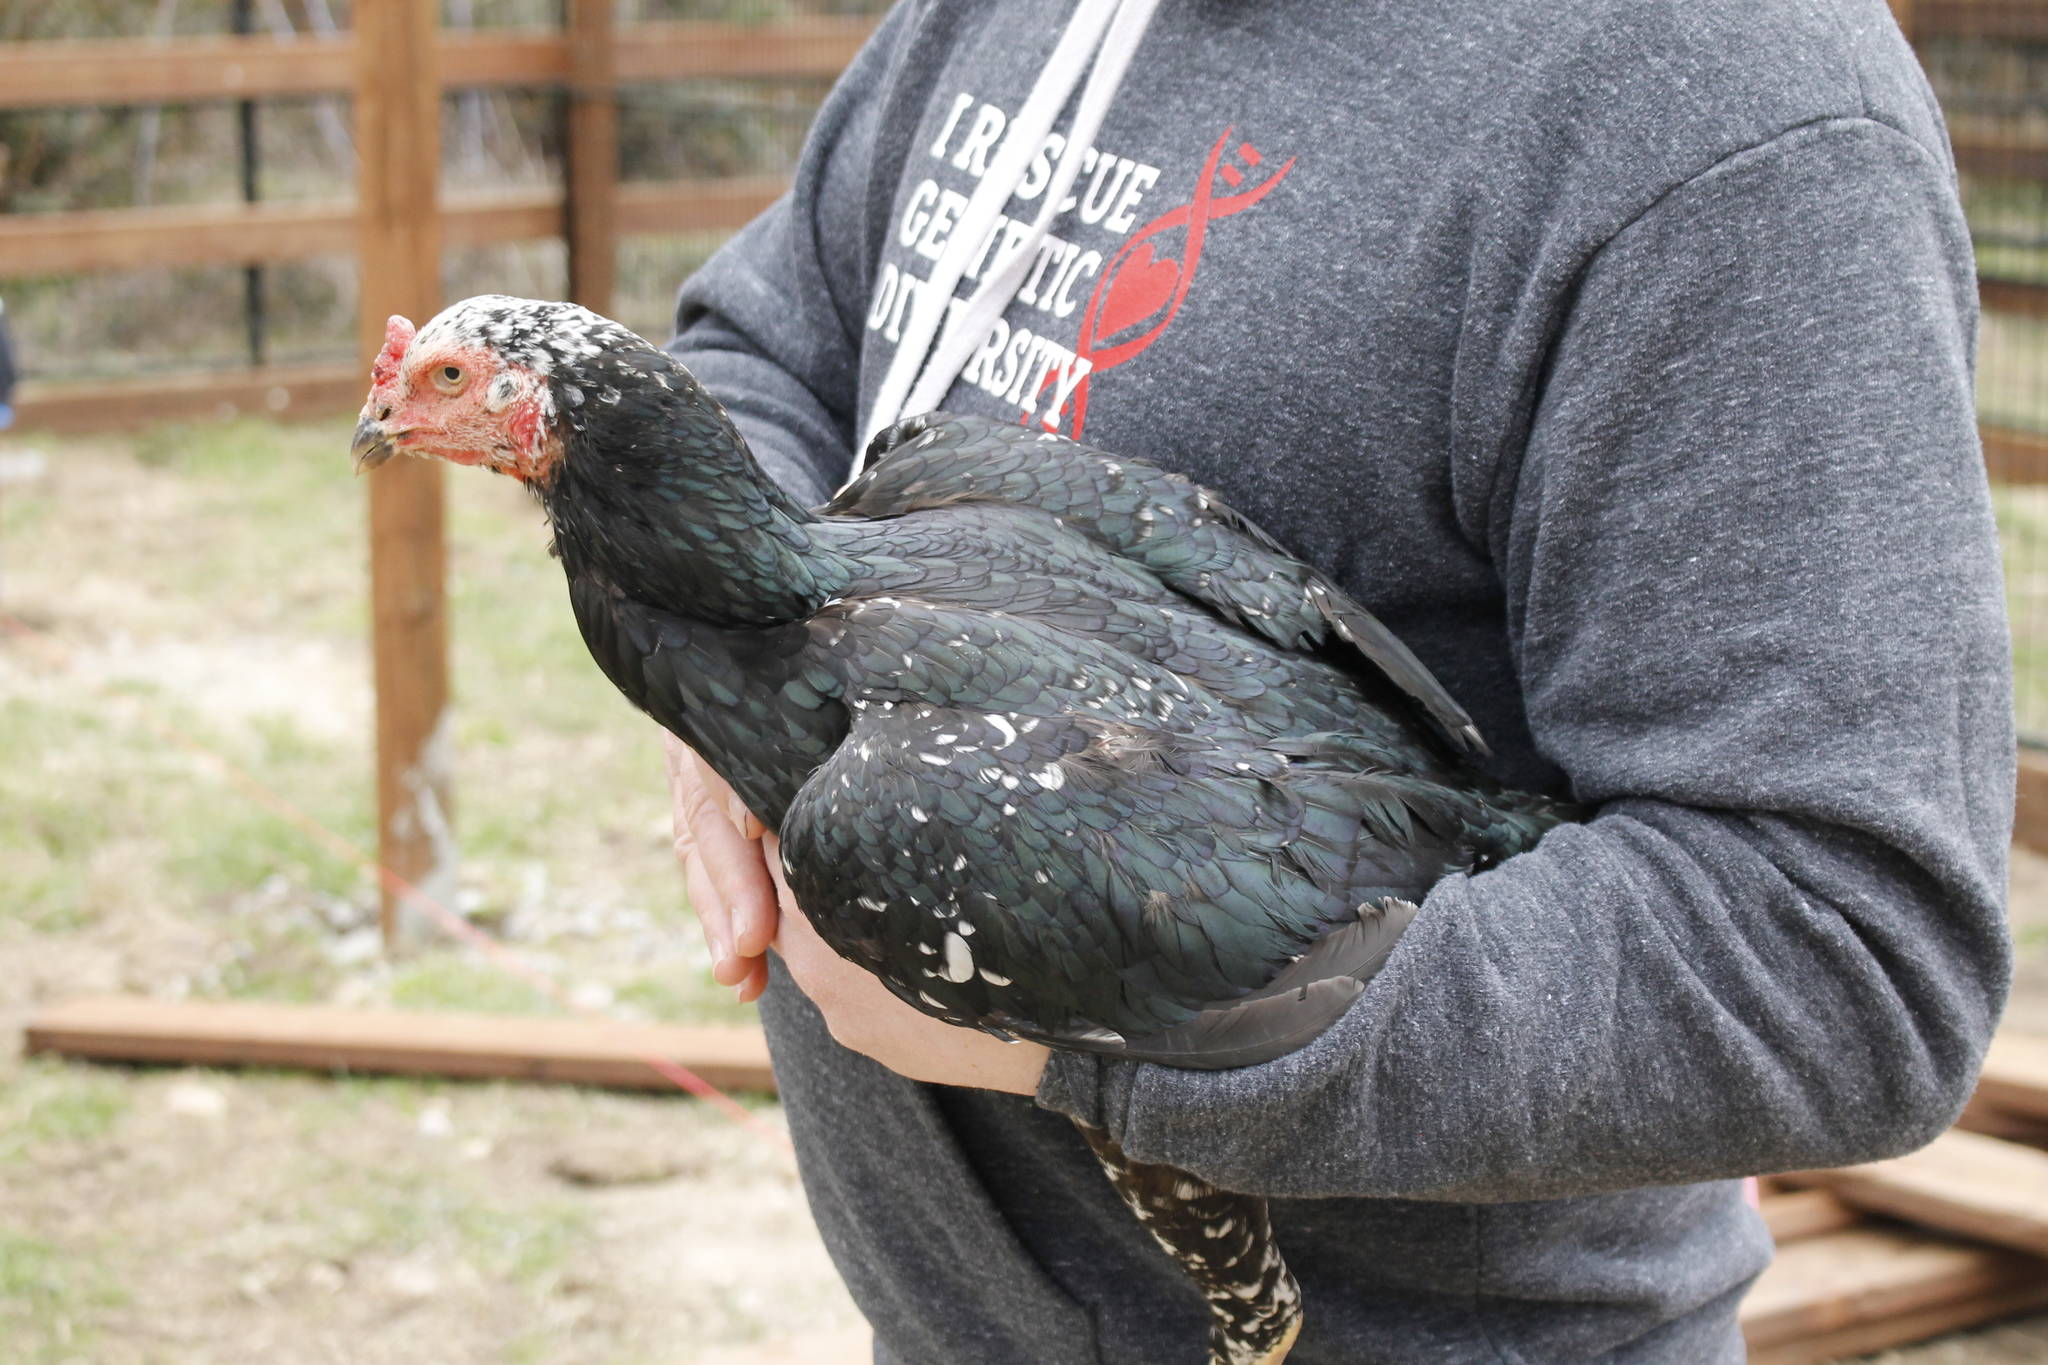 A Shamo hen named Baby Girl also lives at the farm. Photo by Kira Erickson/Whidbey News Group